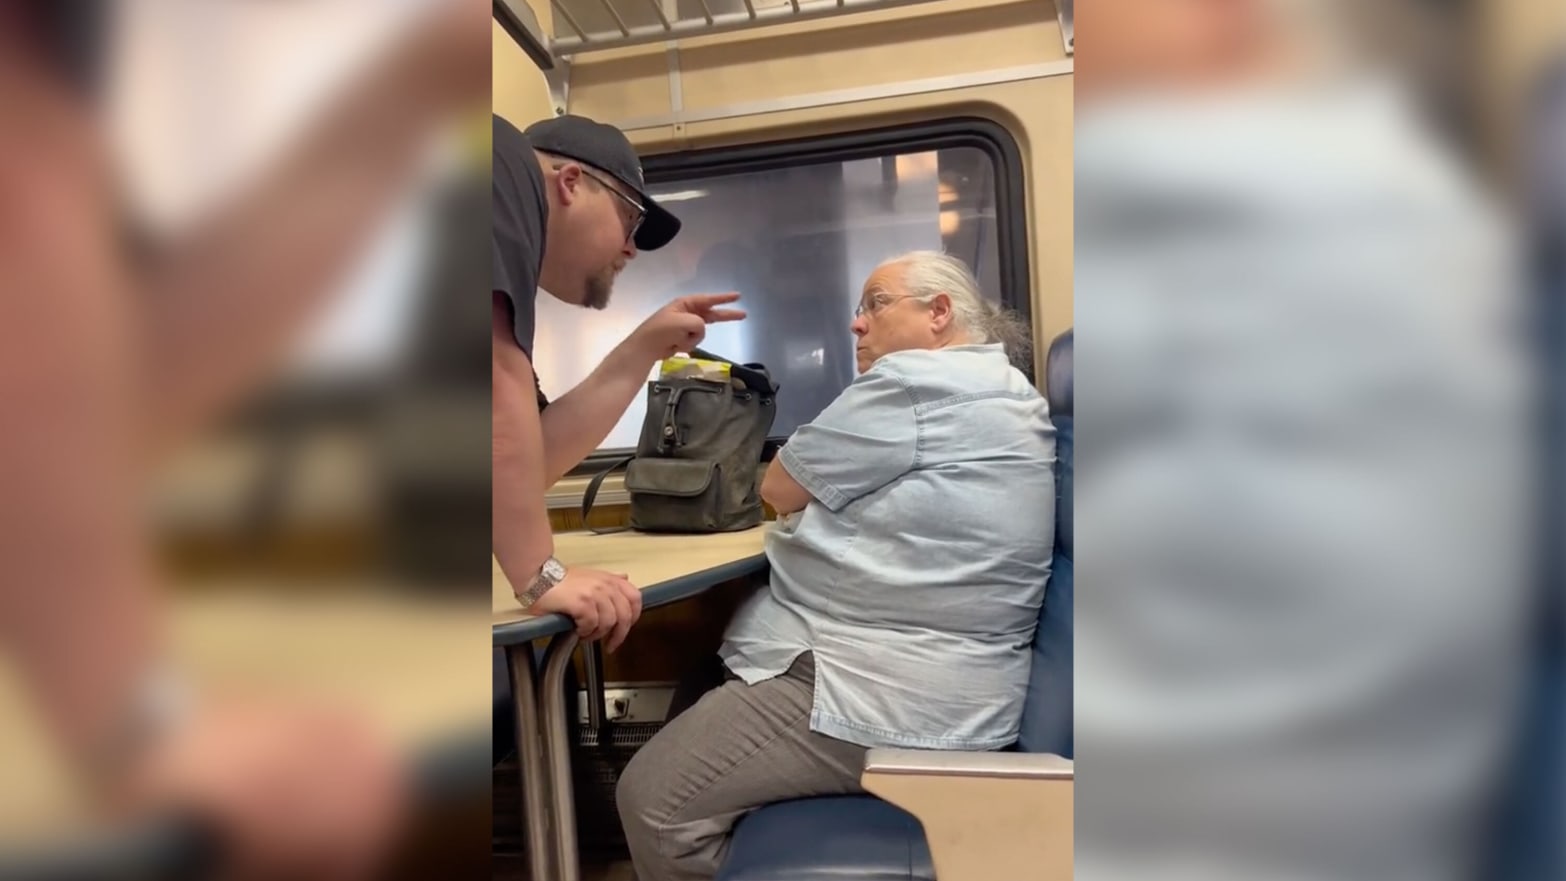 Connecticut Train Conductor Tears Rider a New One for Her Racist Rants photo image